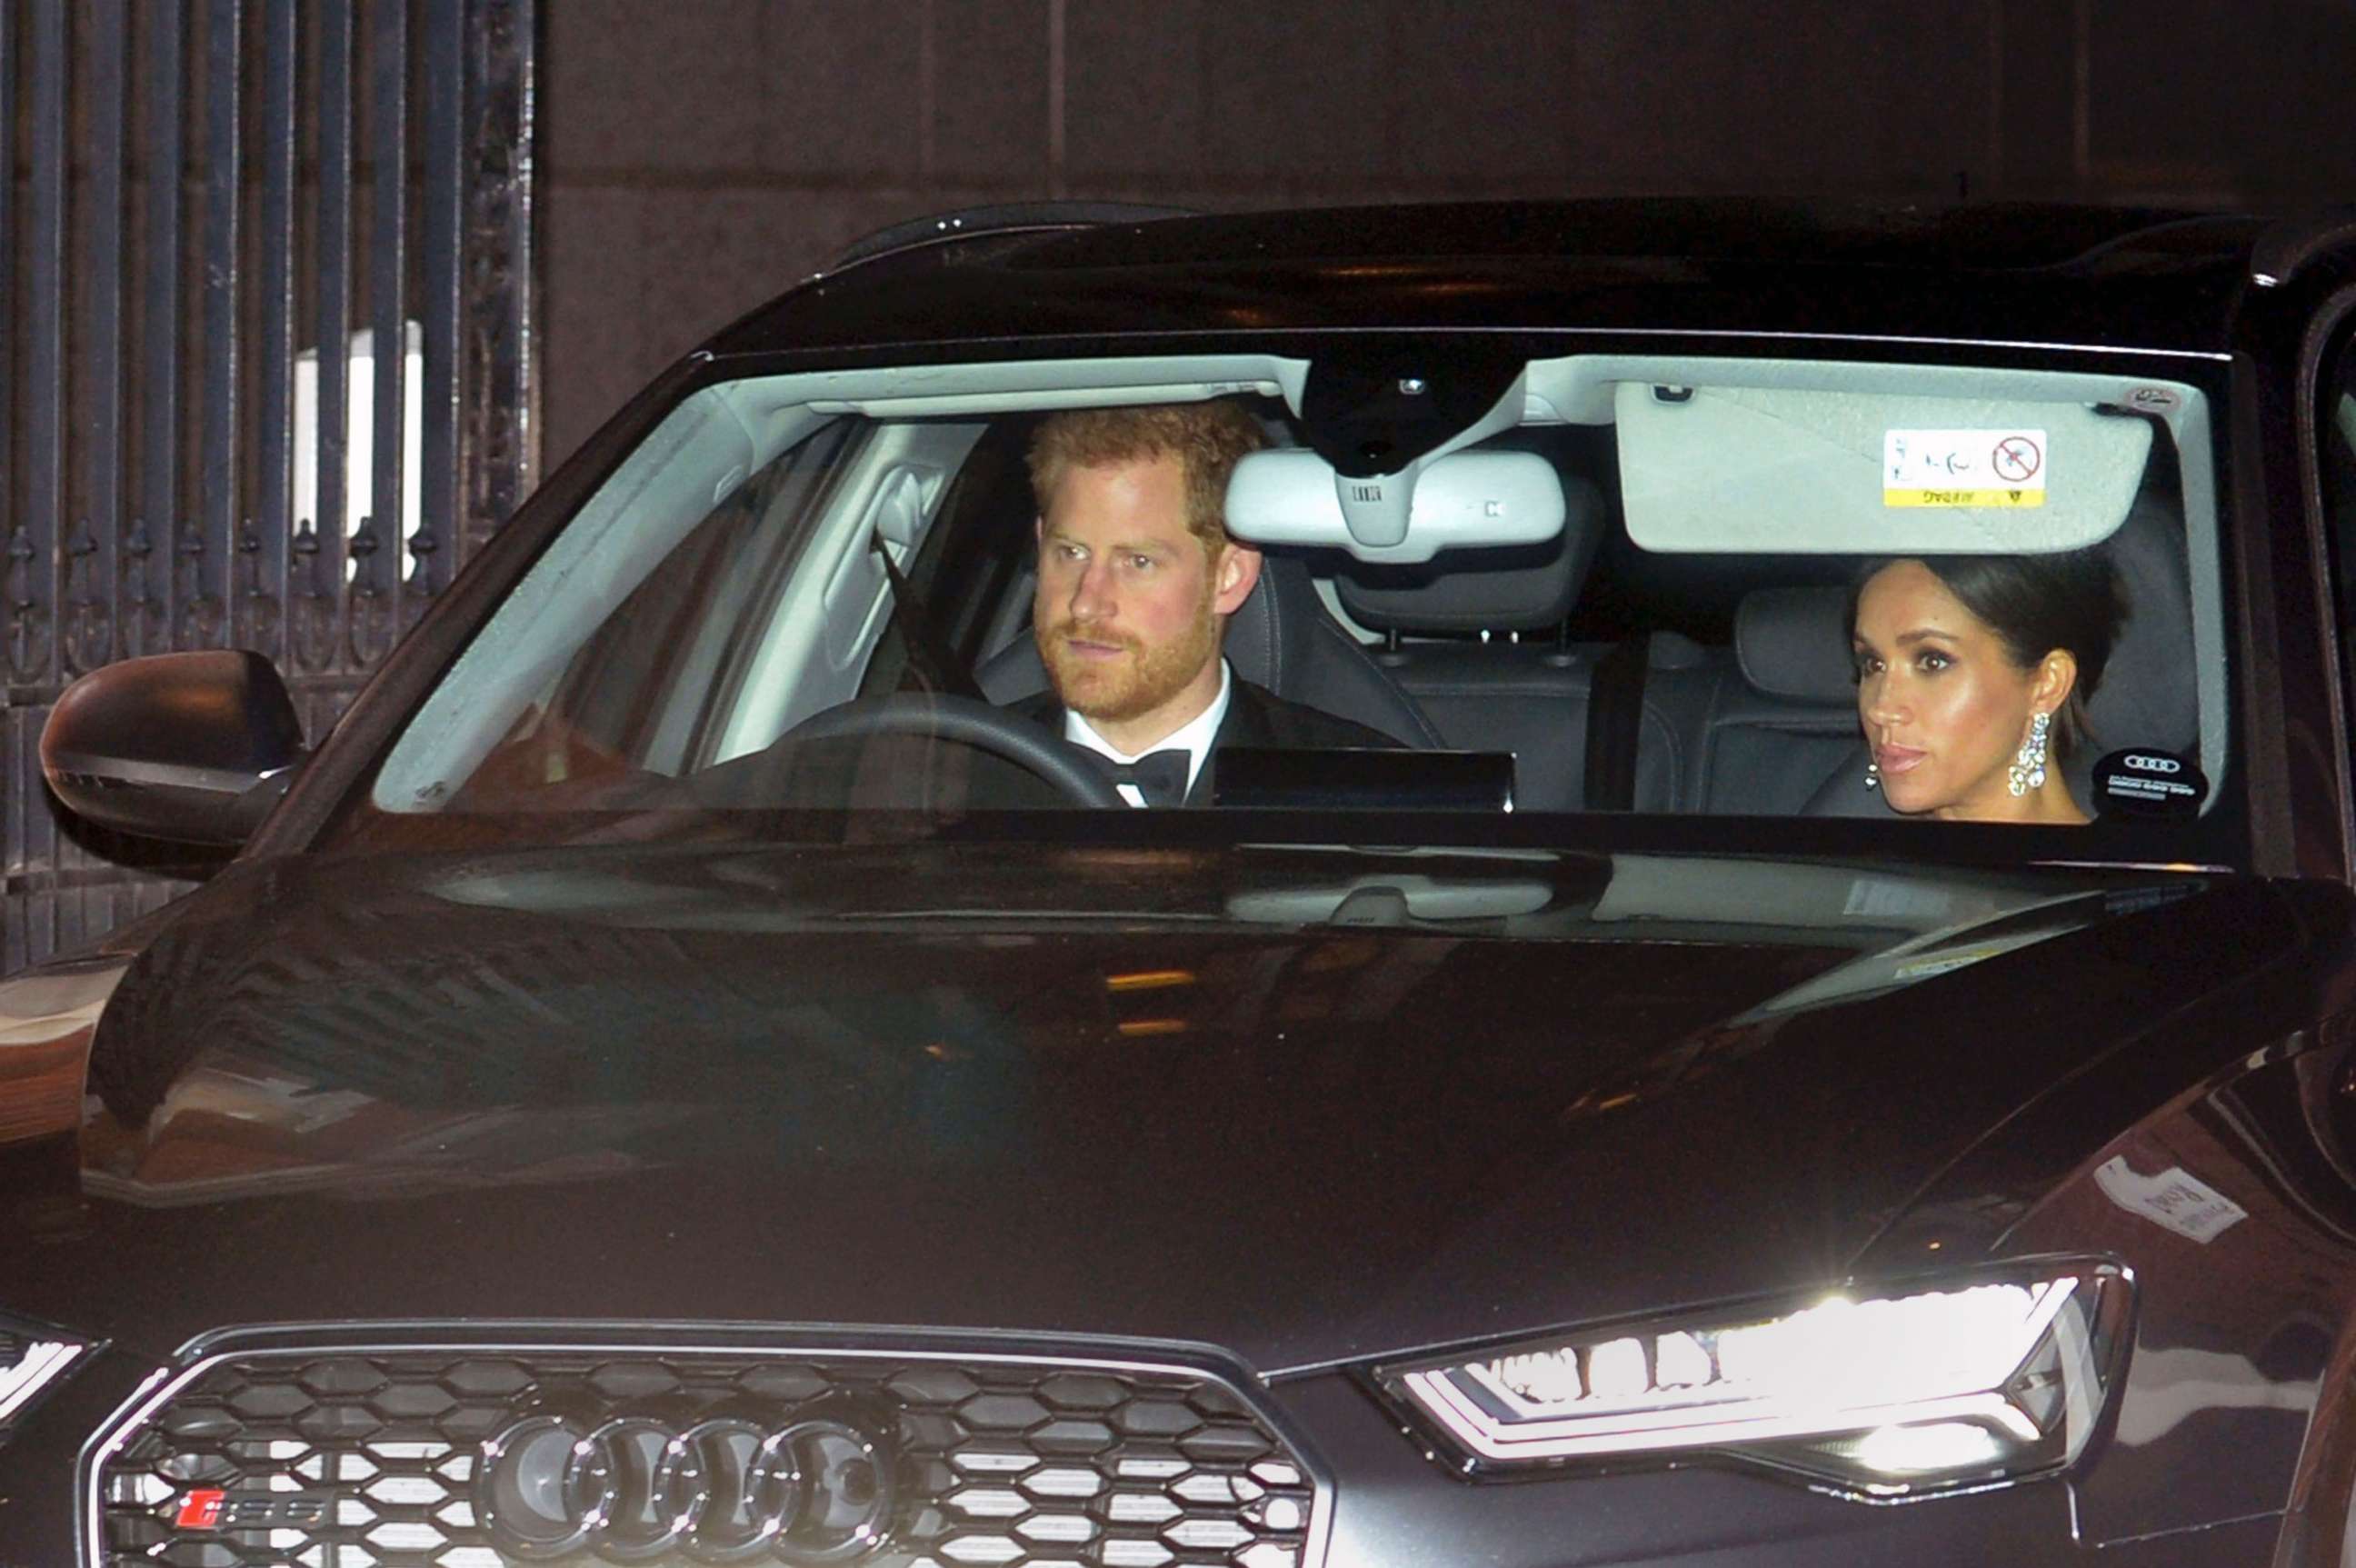 PHOTO: Britain's Prince Harry and Meghan, Duchess of Sussex arrive at Buckingham Palace in London for the Prince of Wales' 70th birthday party, in London, Nov. 14, 2018.